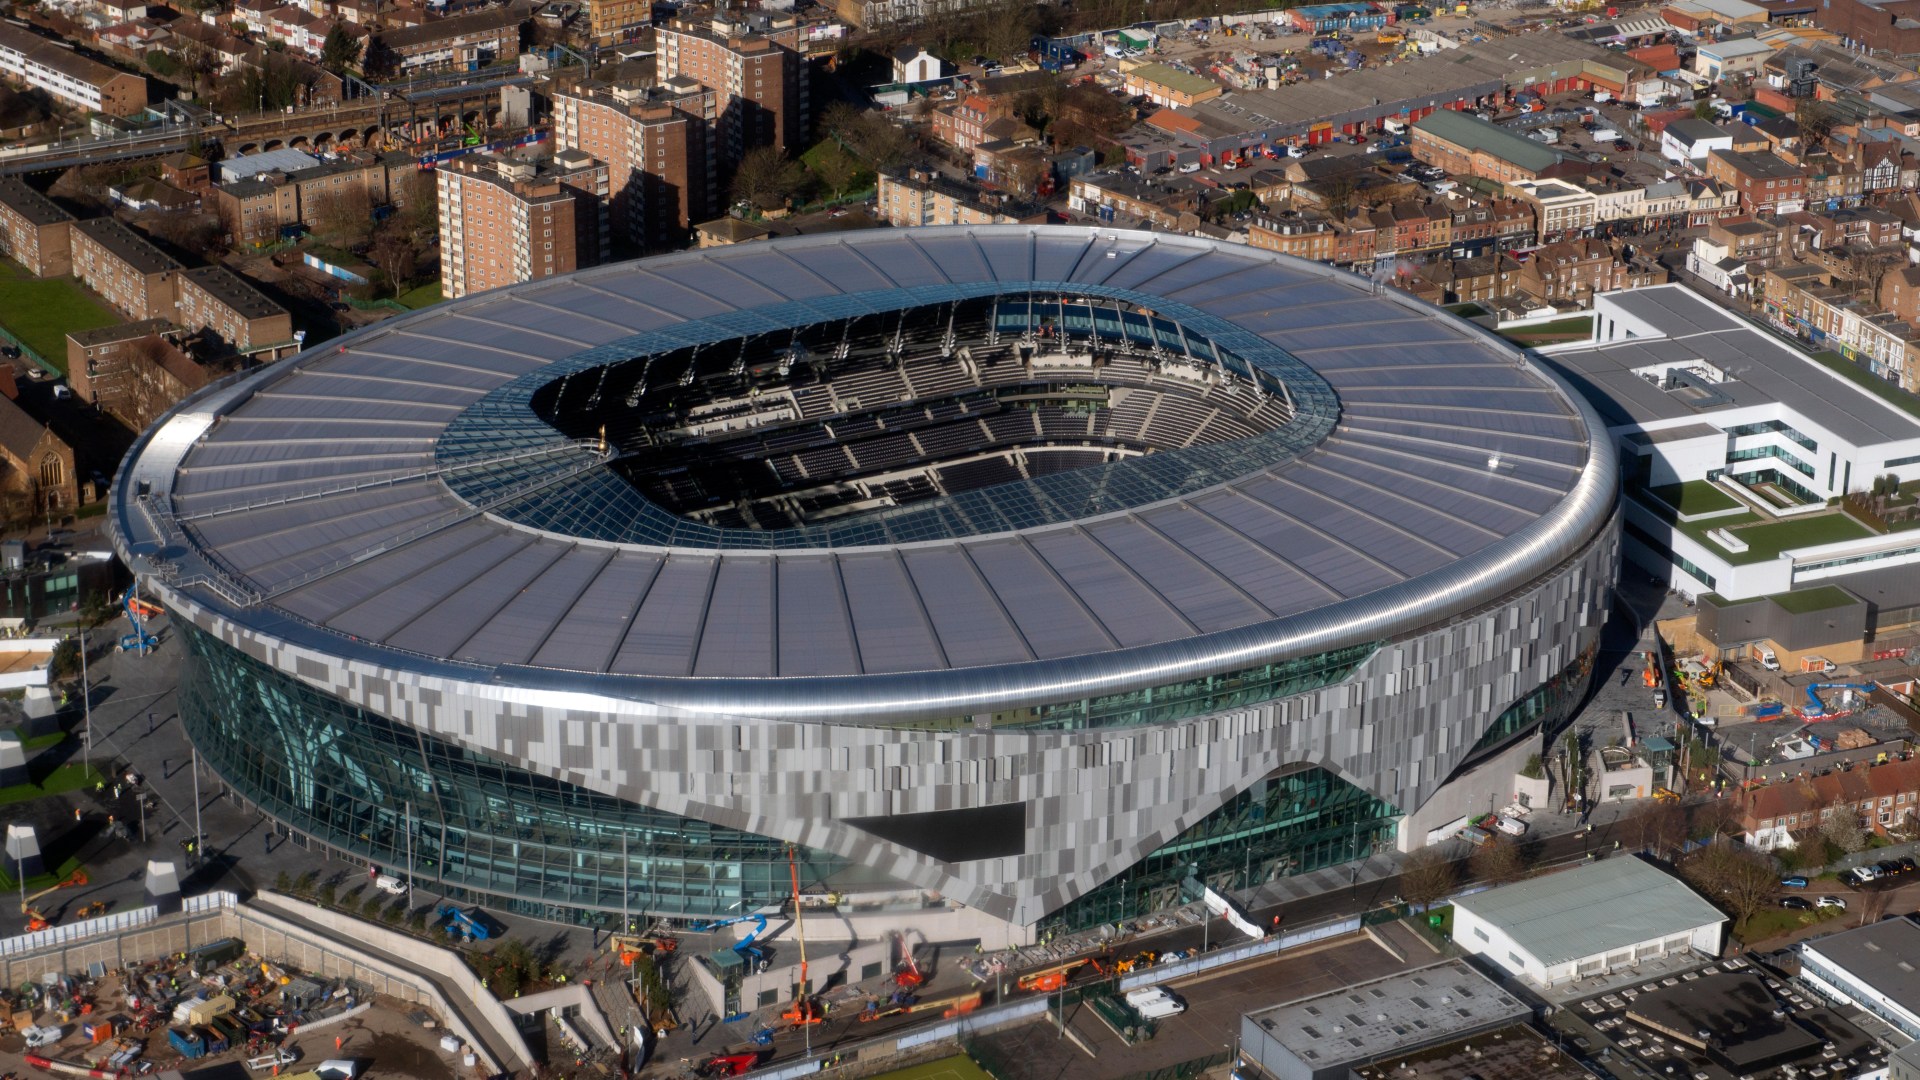 Champions Cup final tickets SOLD OUT as Leinster and Toulouse set to meet in mammoth Tottenham Hotspur Stadium clash [Video]